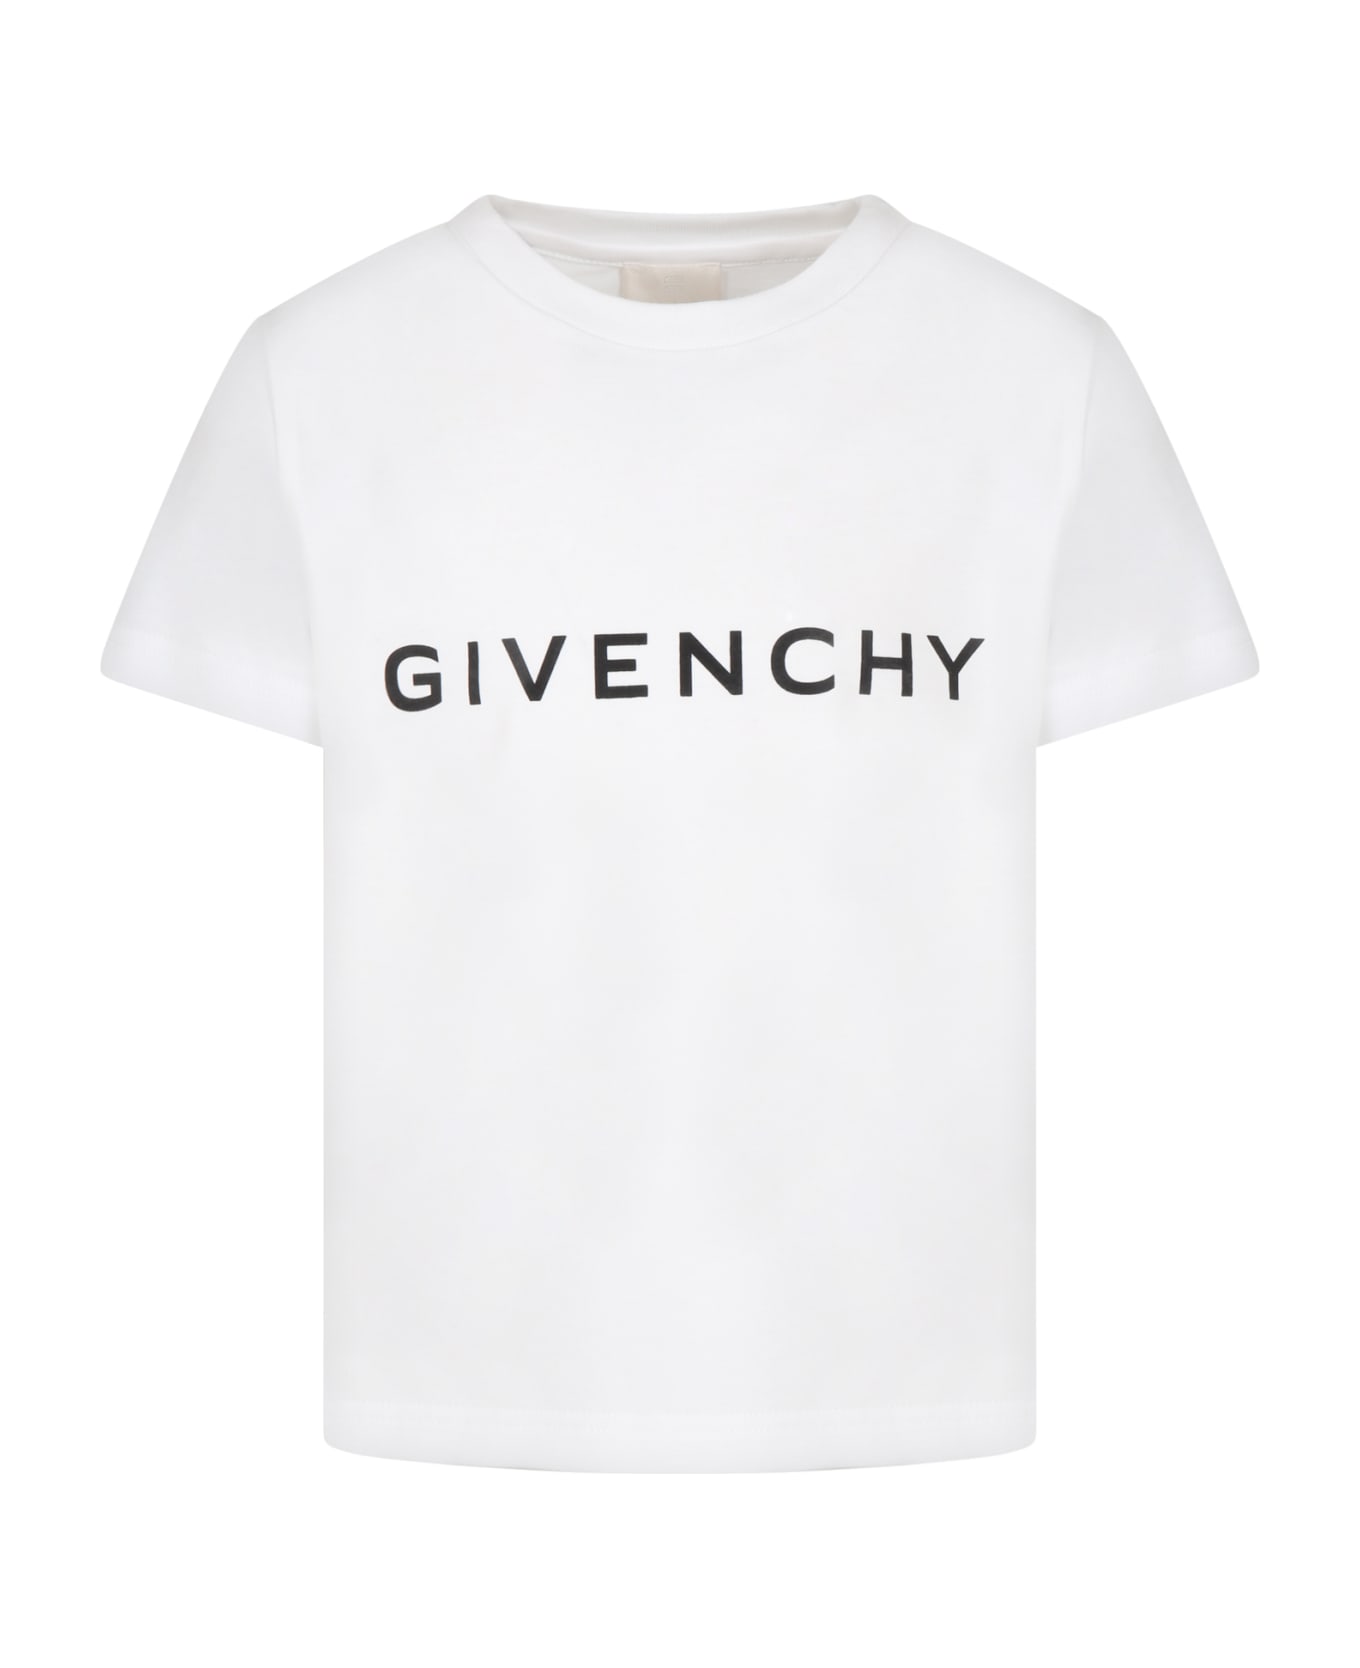 Givenchy White T-shirt For Boy With Black versible - White